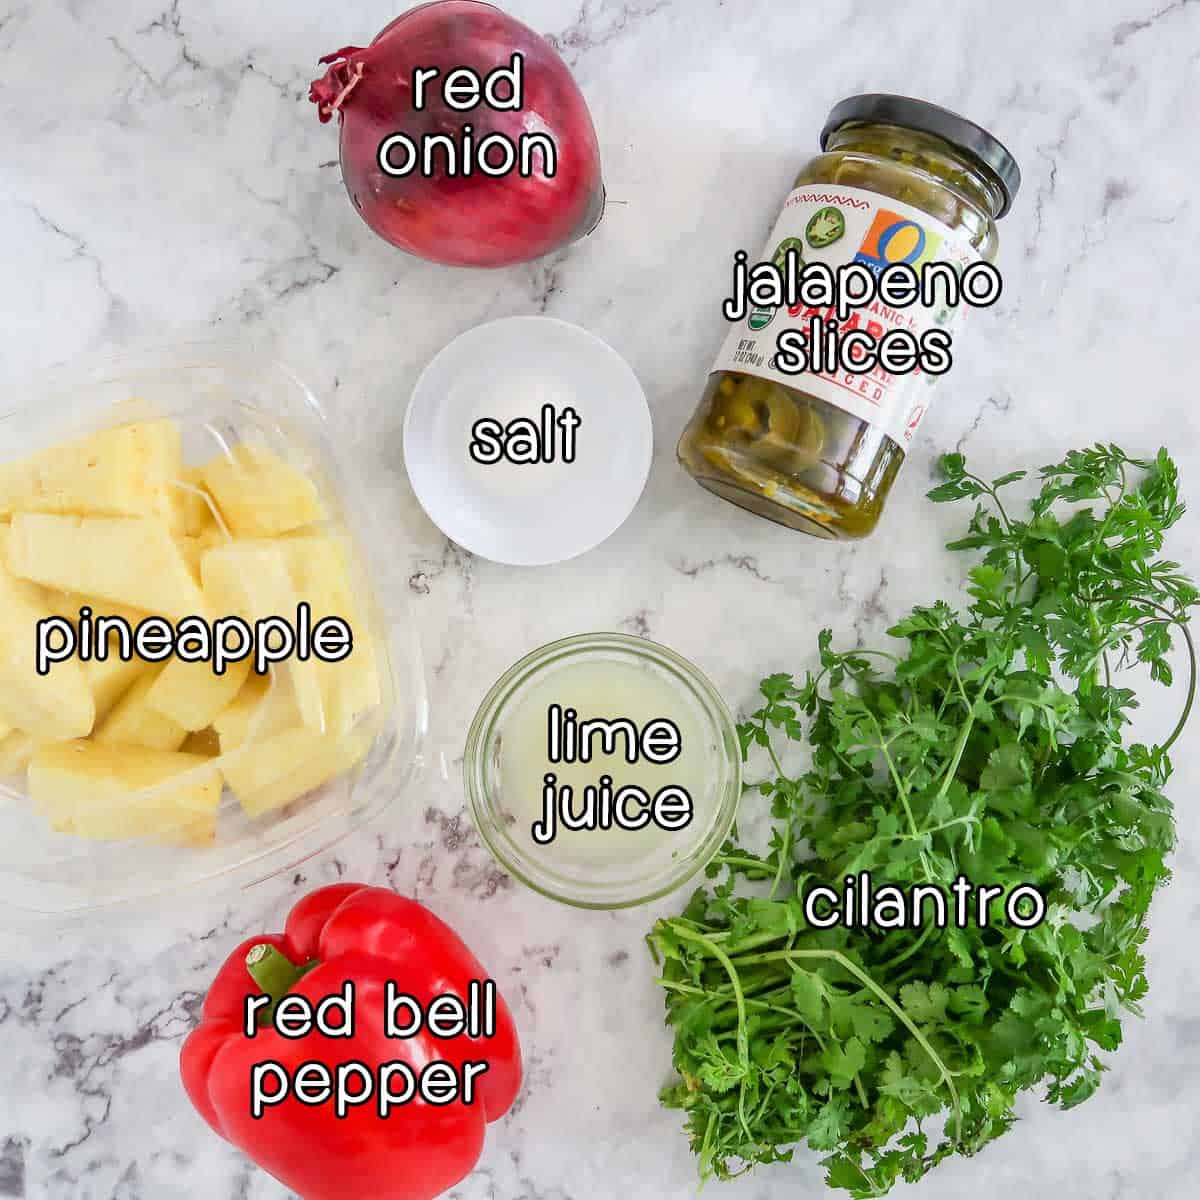 Overhead shot of ingredients - red onion, salt, jalapeno slices. pineapple, cilantro, lime juice, and red bell pepper.